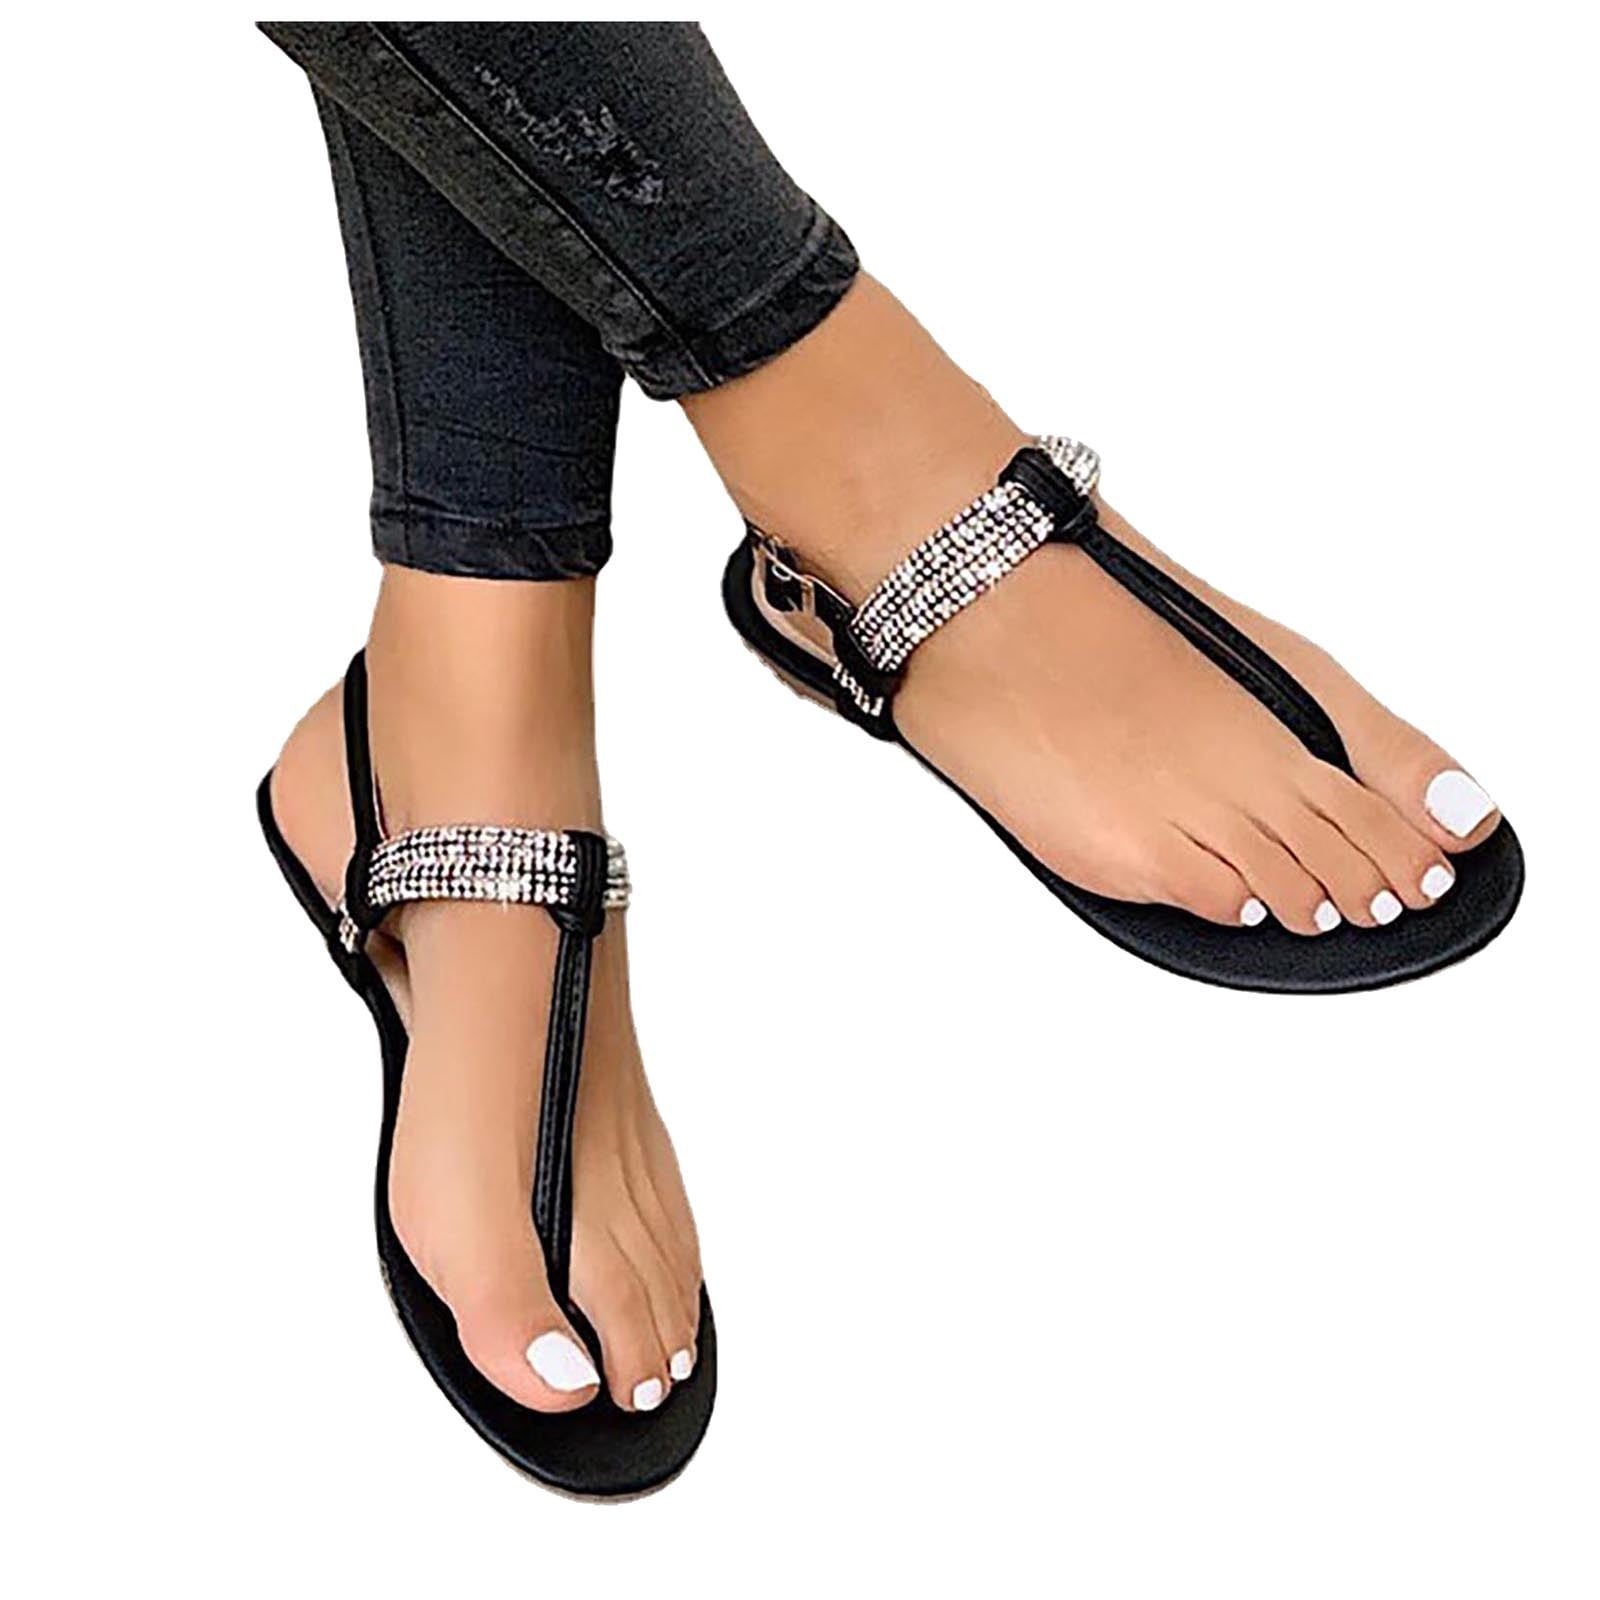 Womens Flat Sandals Open Toe Ankle Strap Sandals Bohemian Elastic Strappy Thong Summer Beach Sandals 